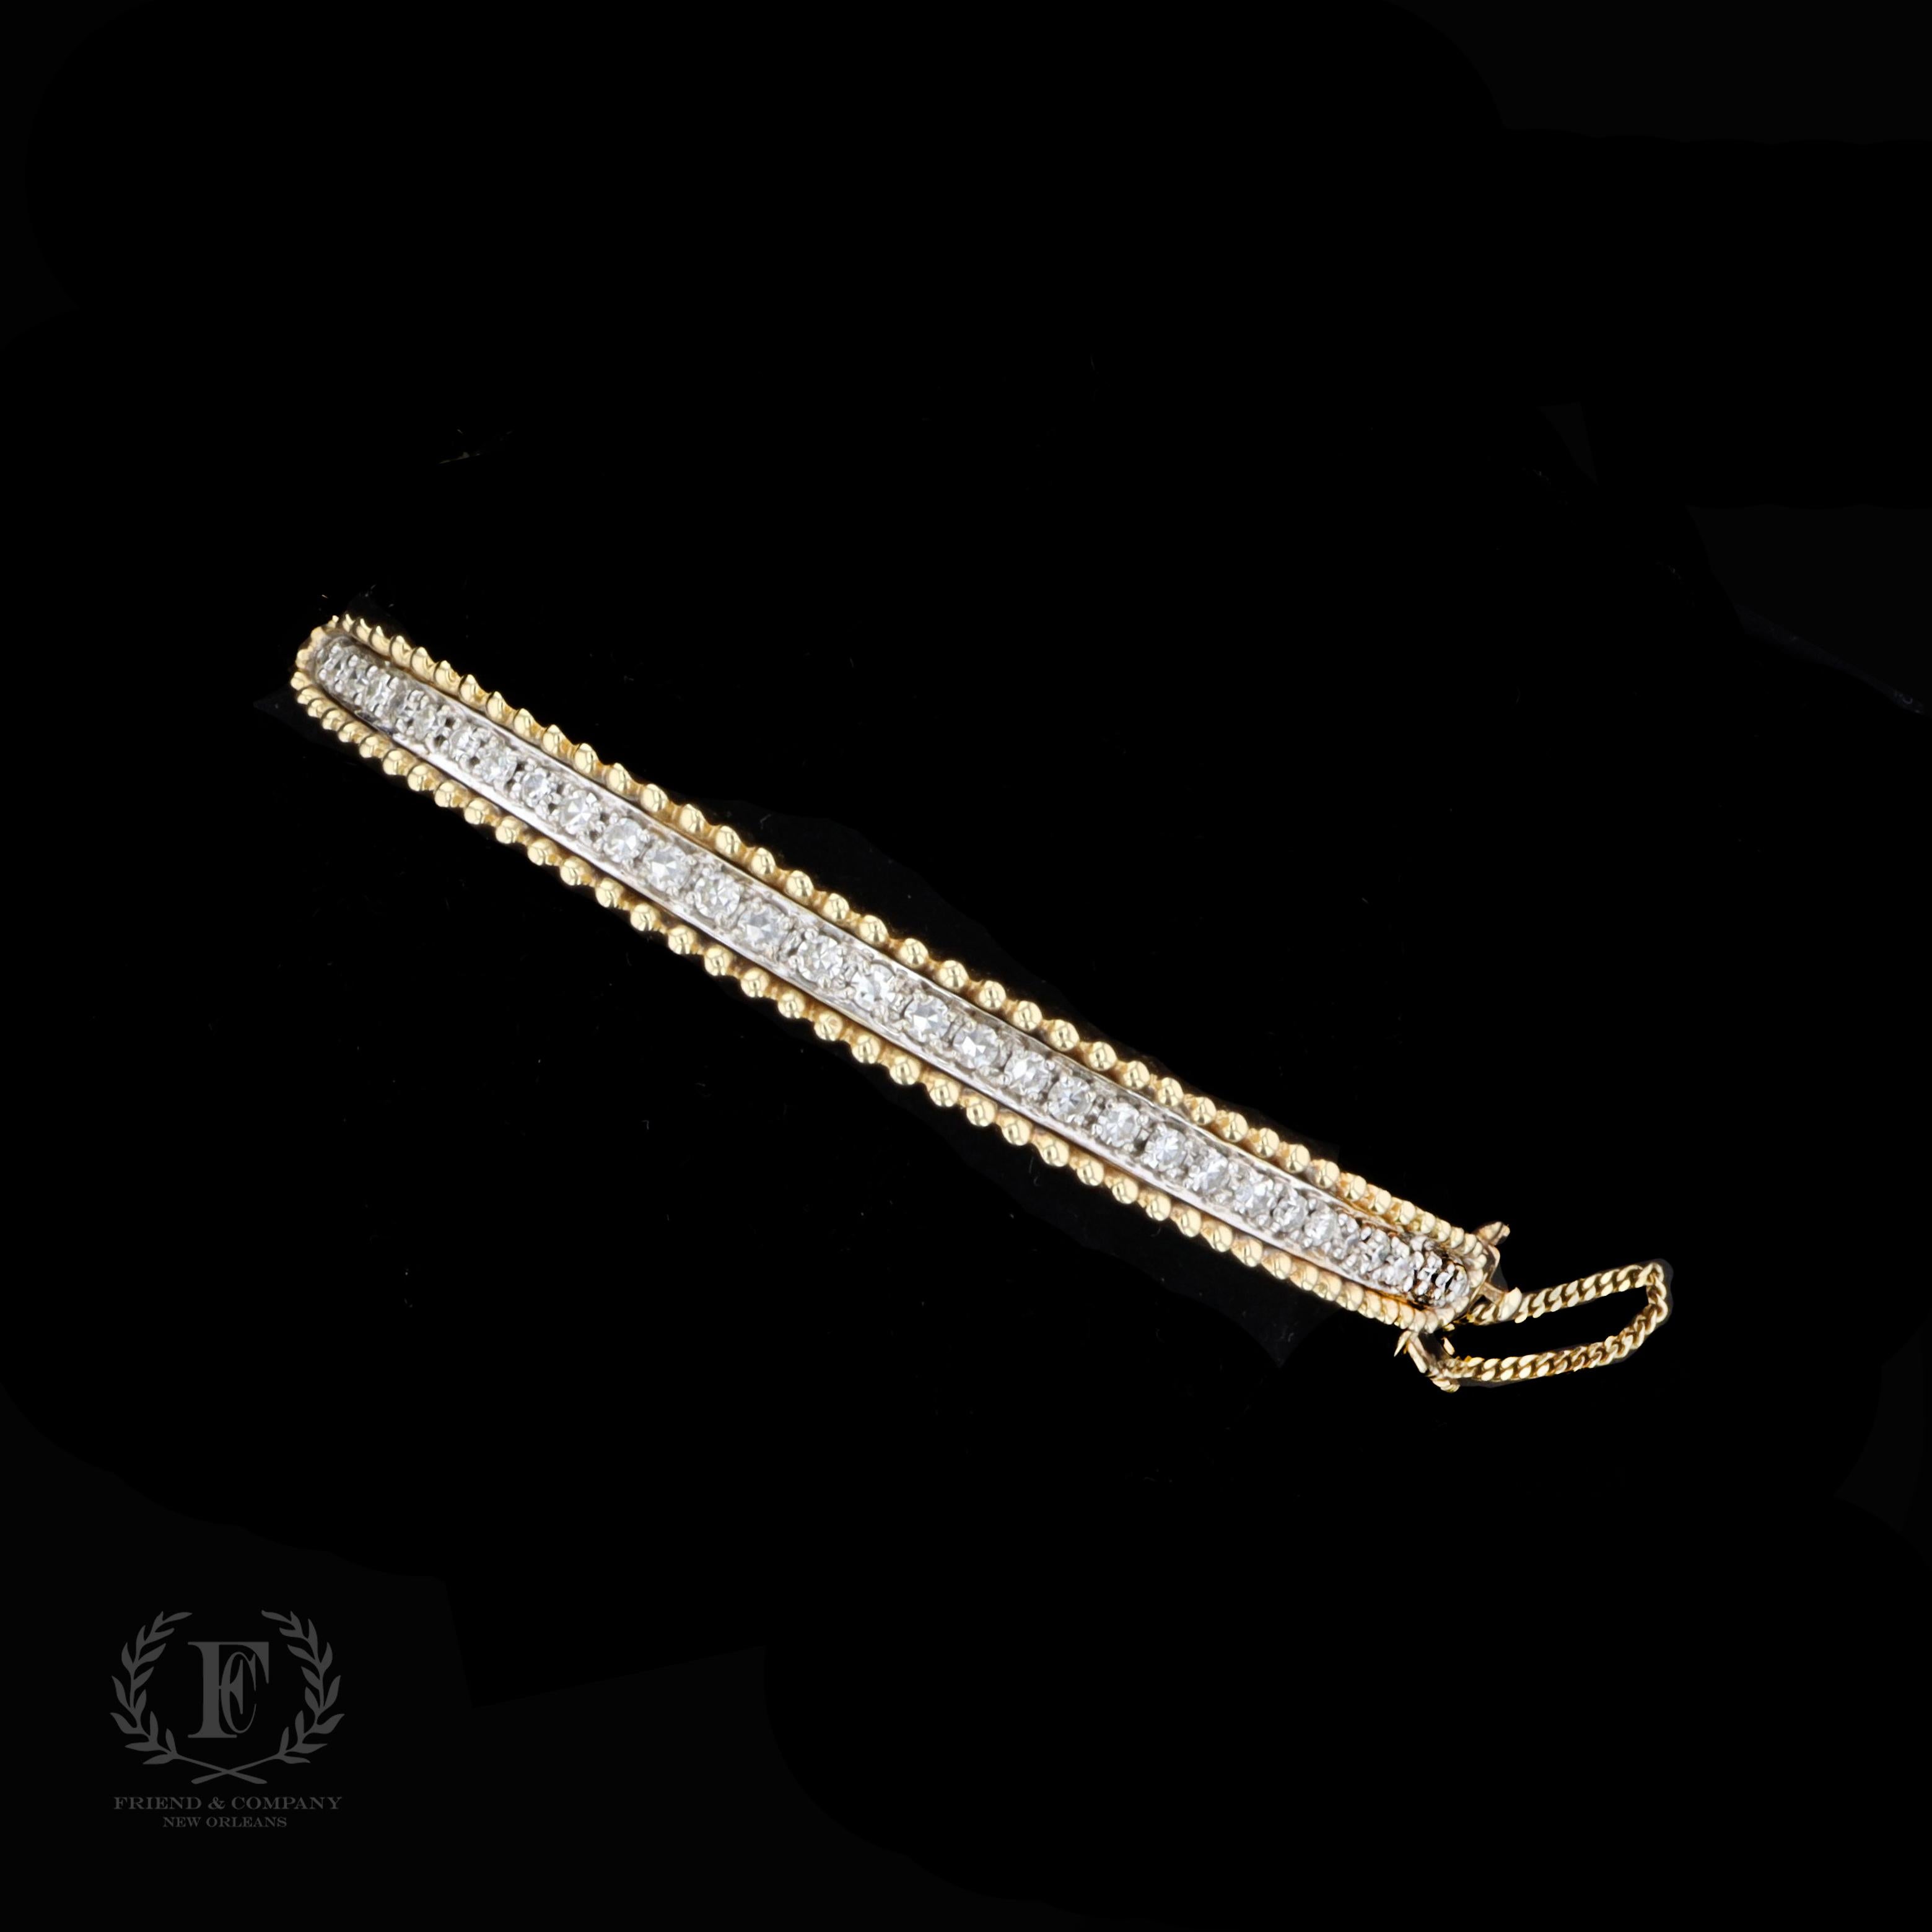 The bangle is set with round cut diamonds that weigh approximately 1.65 carats. The color of the diamonds is G with VS clarity. The bangle measures 6 millimeters in width at the widest base and will fit a standard wrist size. The bangle is stamped